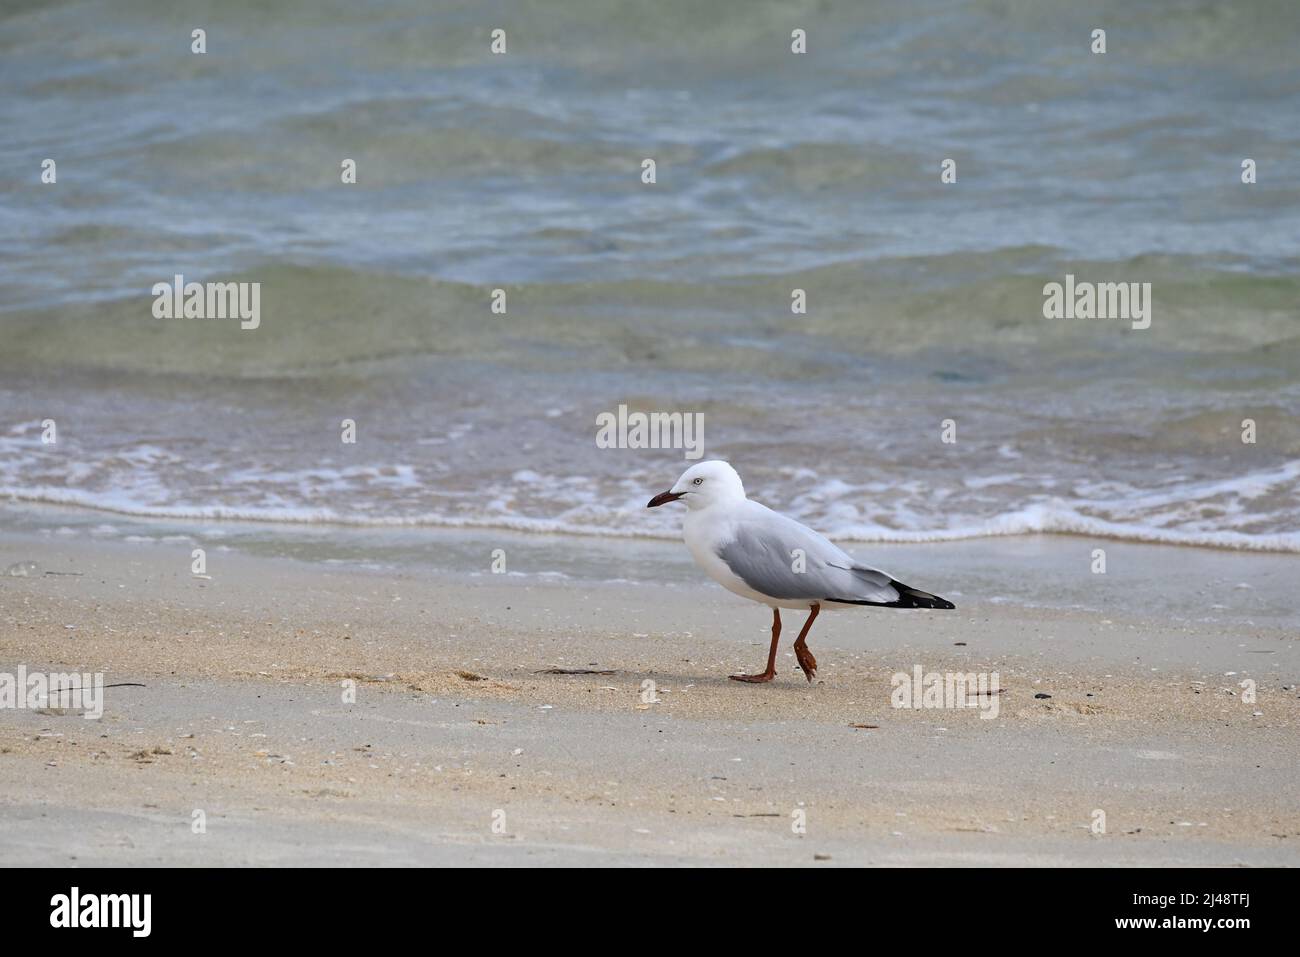 Seagull, or silver gull, walking along a sandy beach, right by the water, with small waves gently approaching the shore in the background Stock Photo